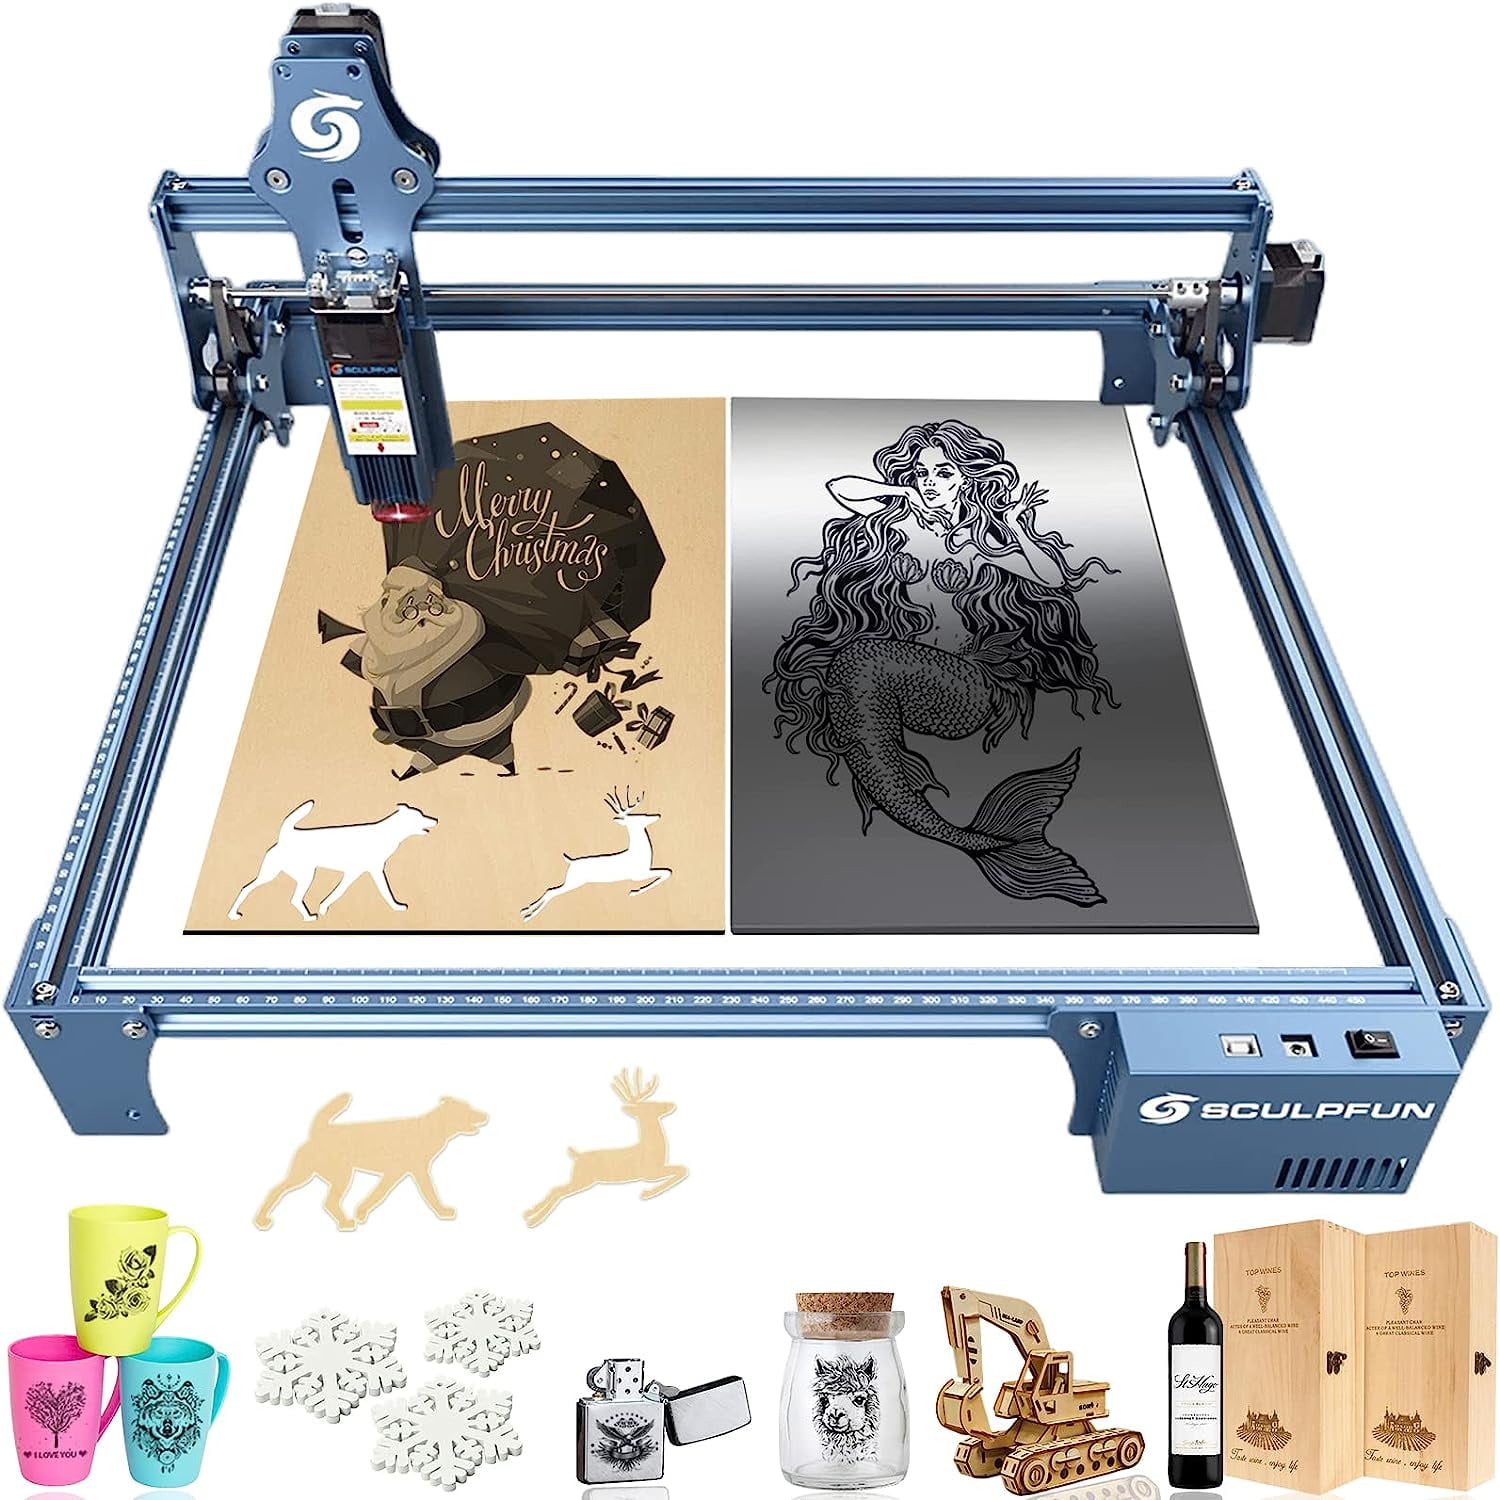 Sculpfun S9 Laser Engraving Machine: Incredible Results at a Decent Price 